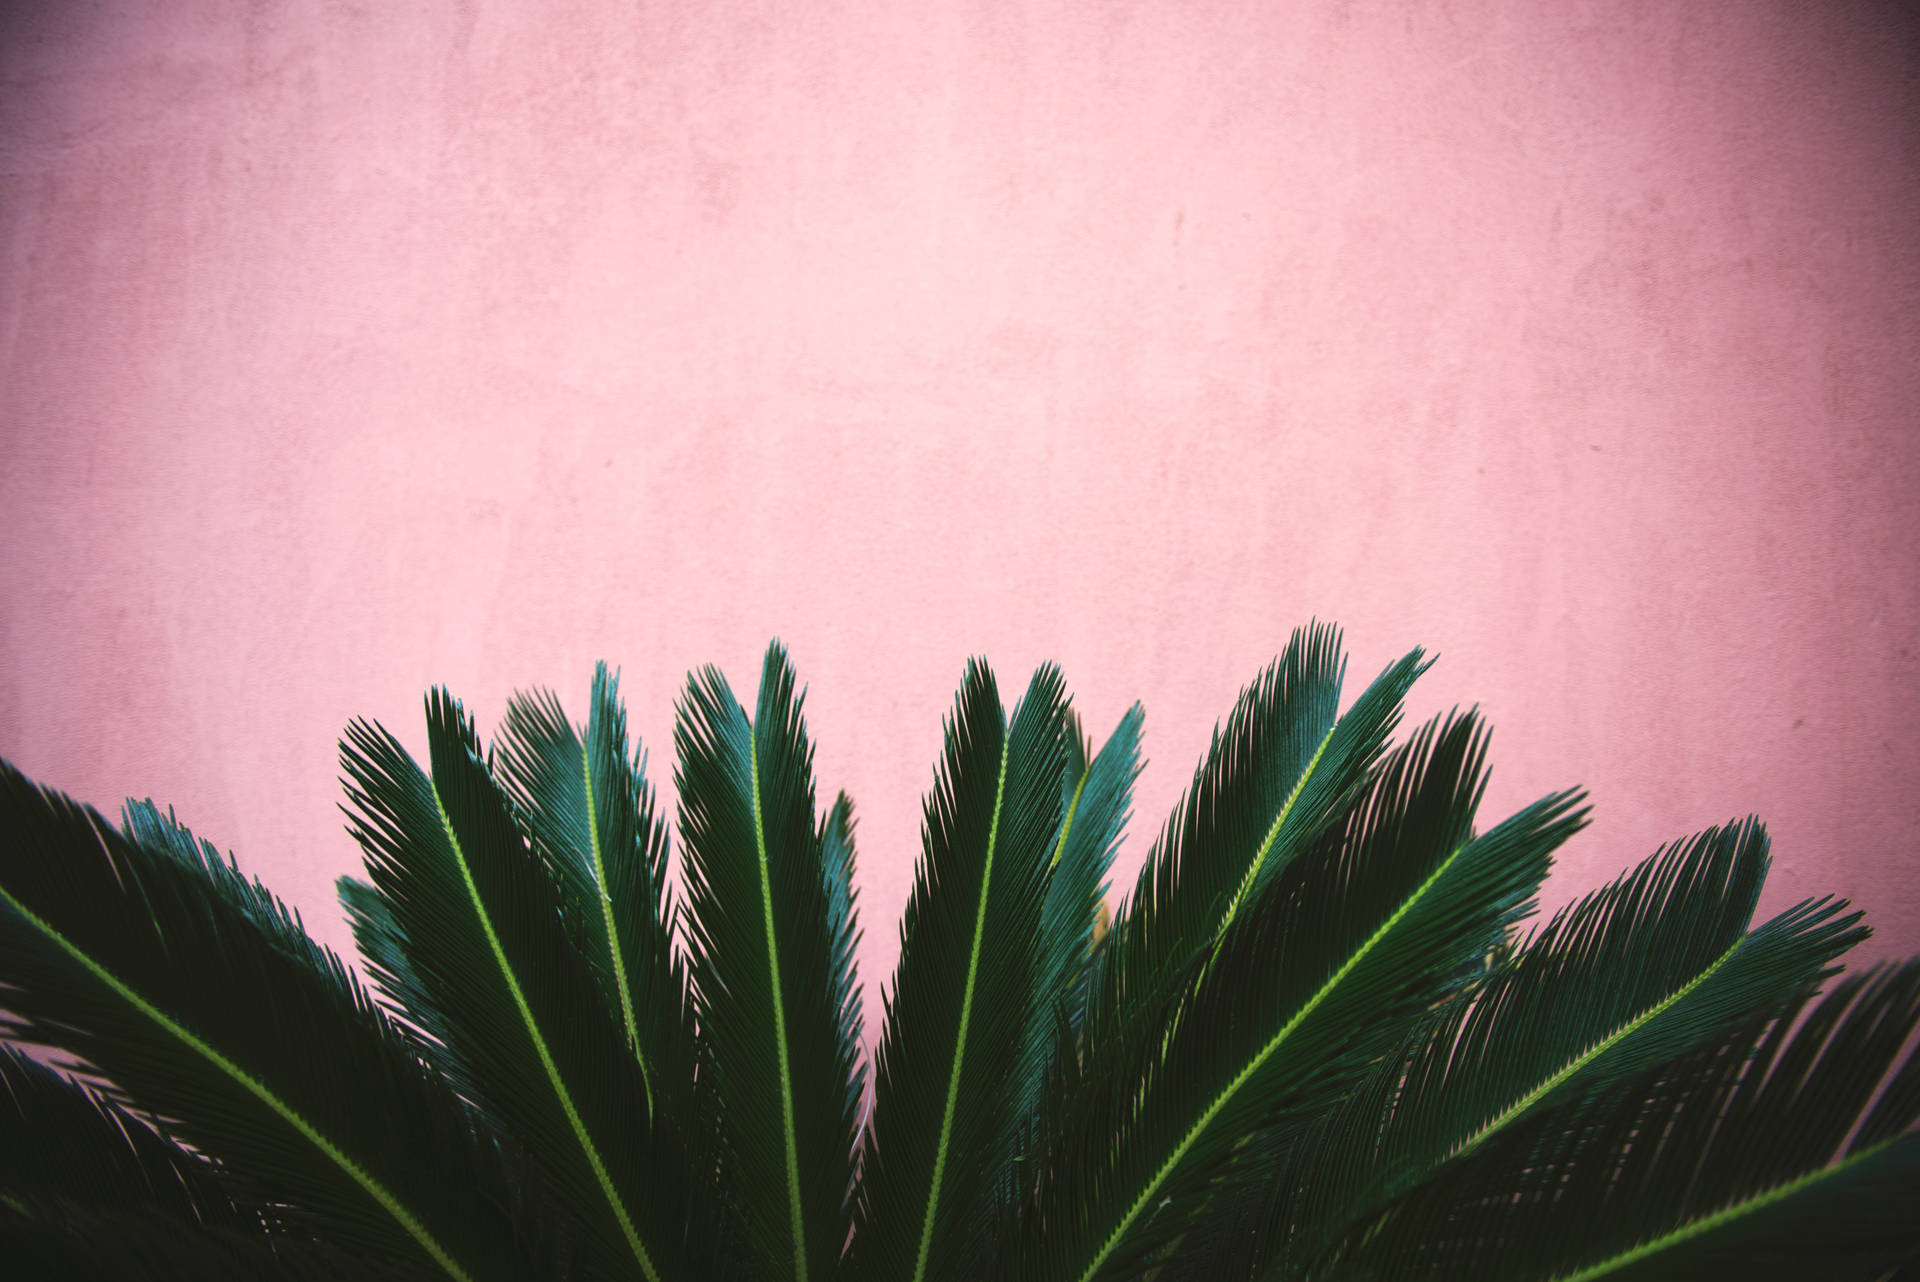 Striking Plant Leaves Against A Kawaii Pink Wall Background